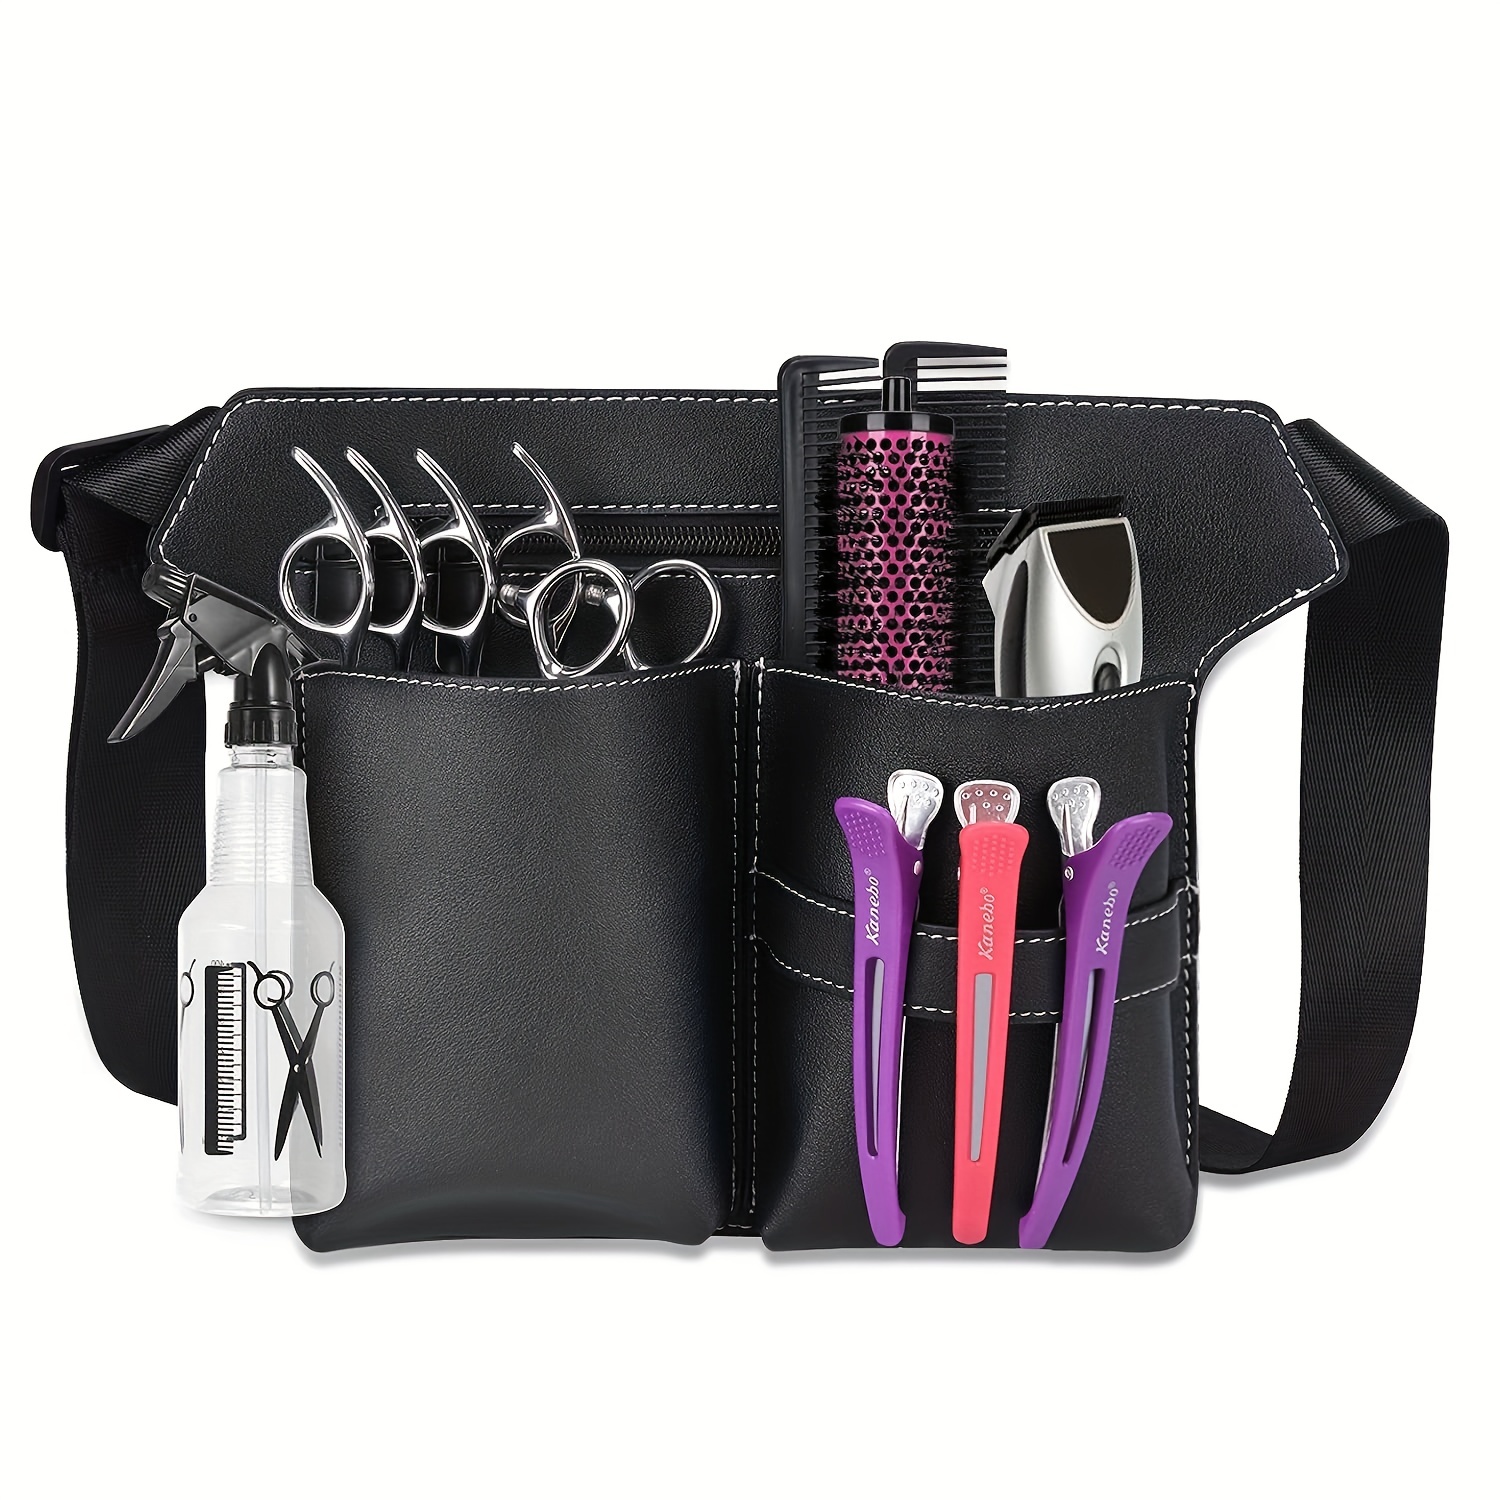 

Professional Hairdresser Scissor Bag With Waist Belt - Durable Pu Leather Storage Holster For Hair Salon Tools And Accessories